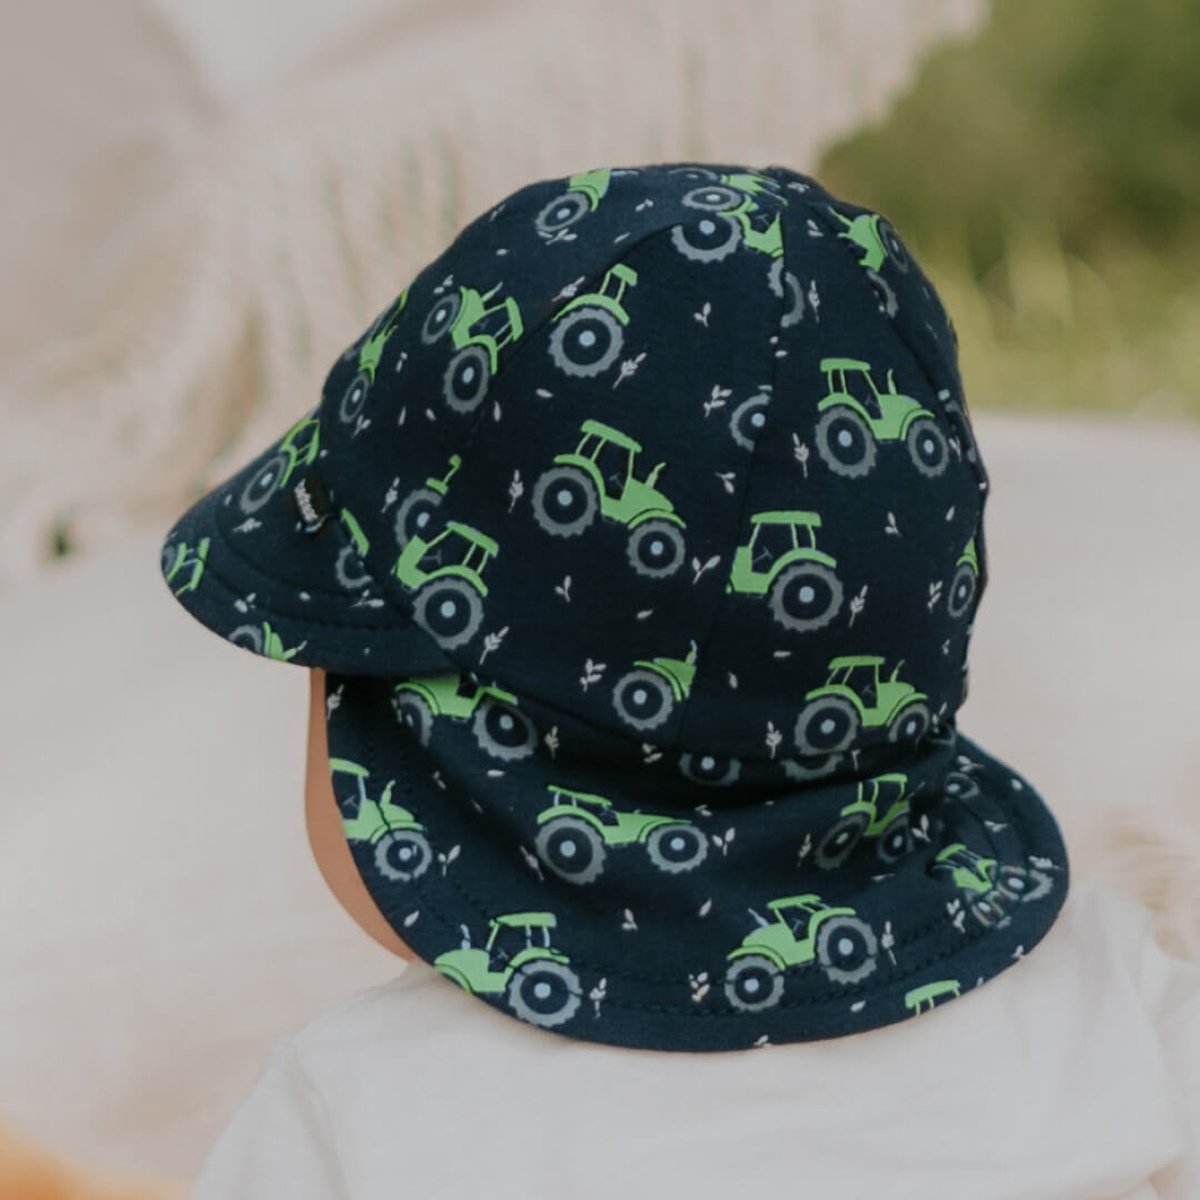 Bedhead Toddler Legionnaire Hat Tractor | Bedhead Hats